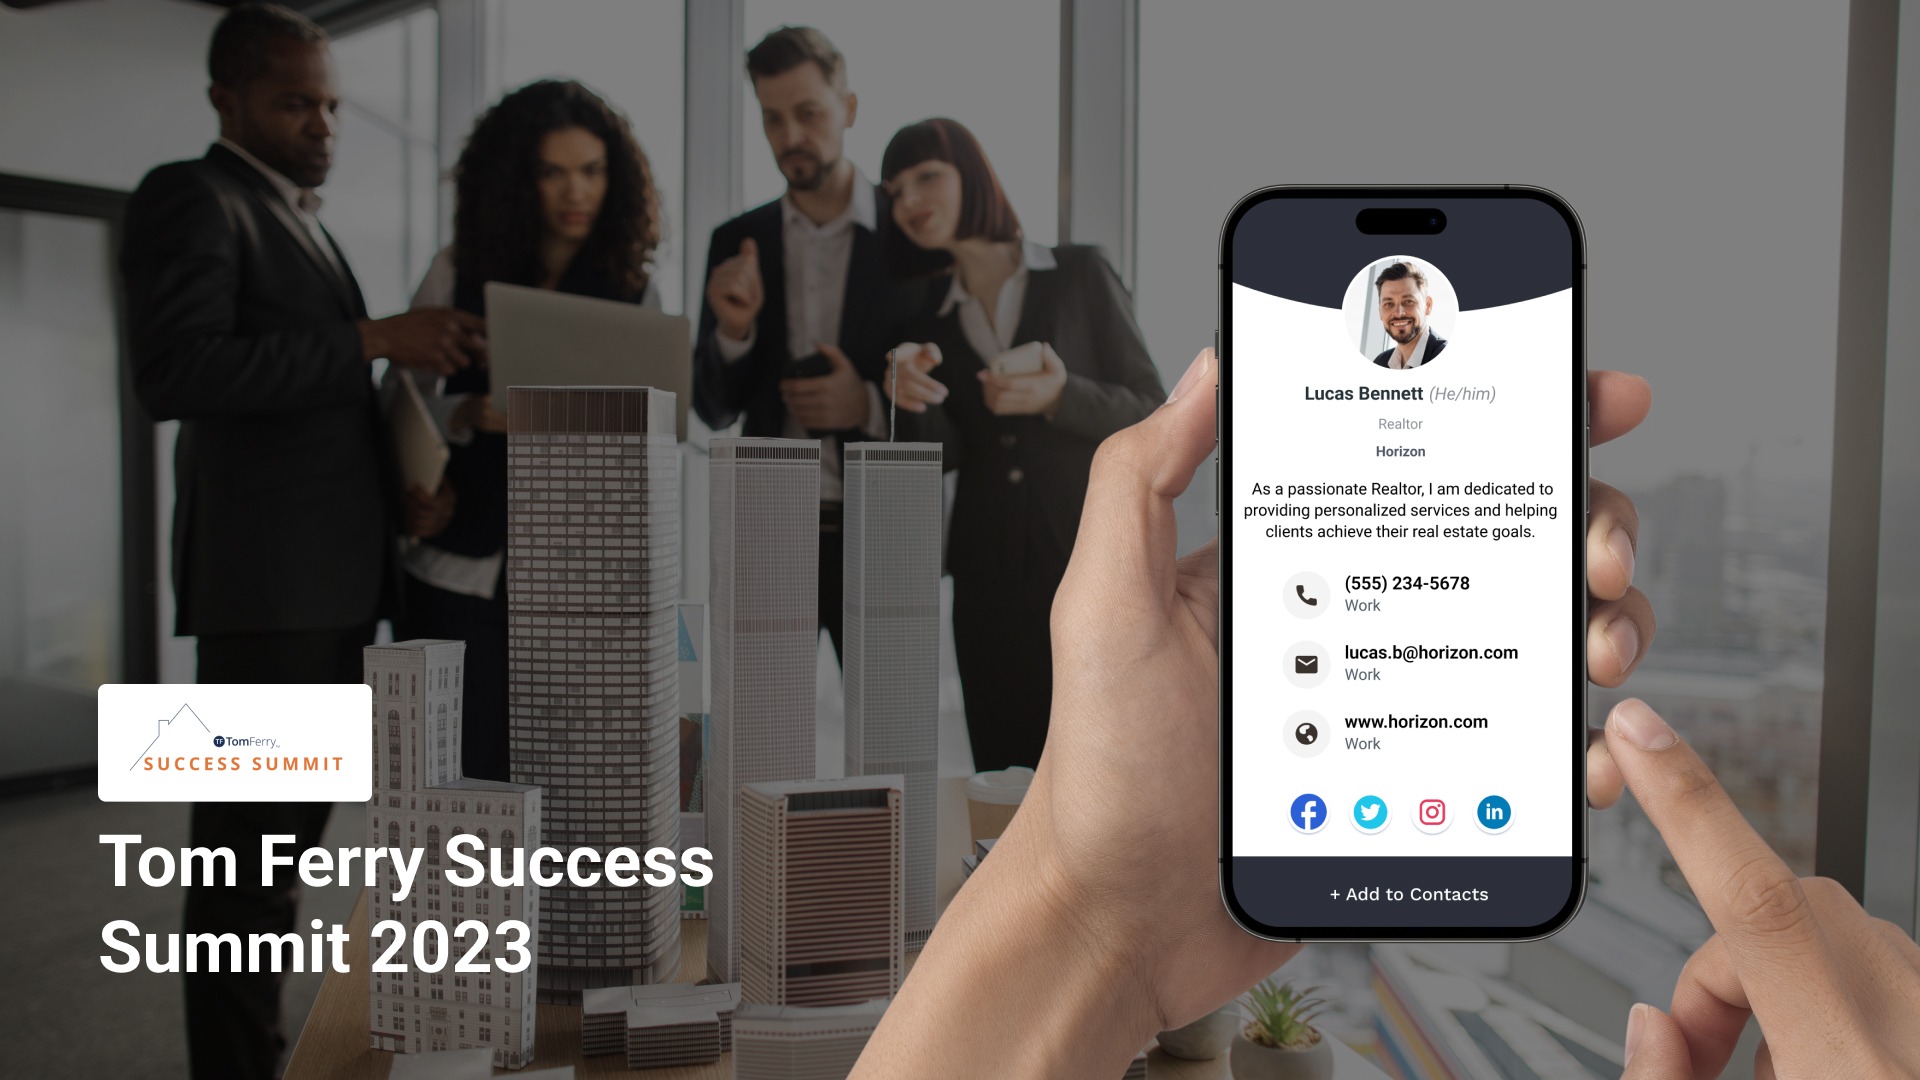 6 Reasons To Use Digital Business Cards at the Tom Ferry Success Summit 2023 [+Bonus Networking Tips]